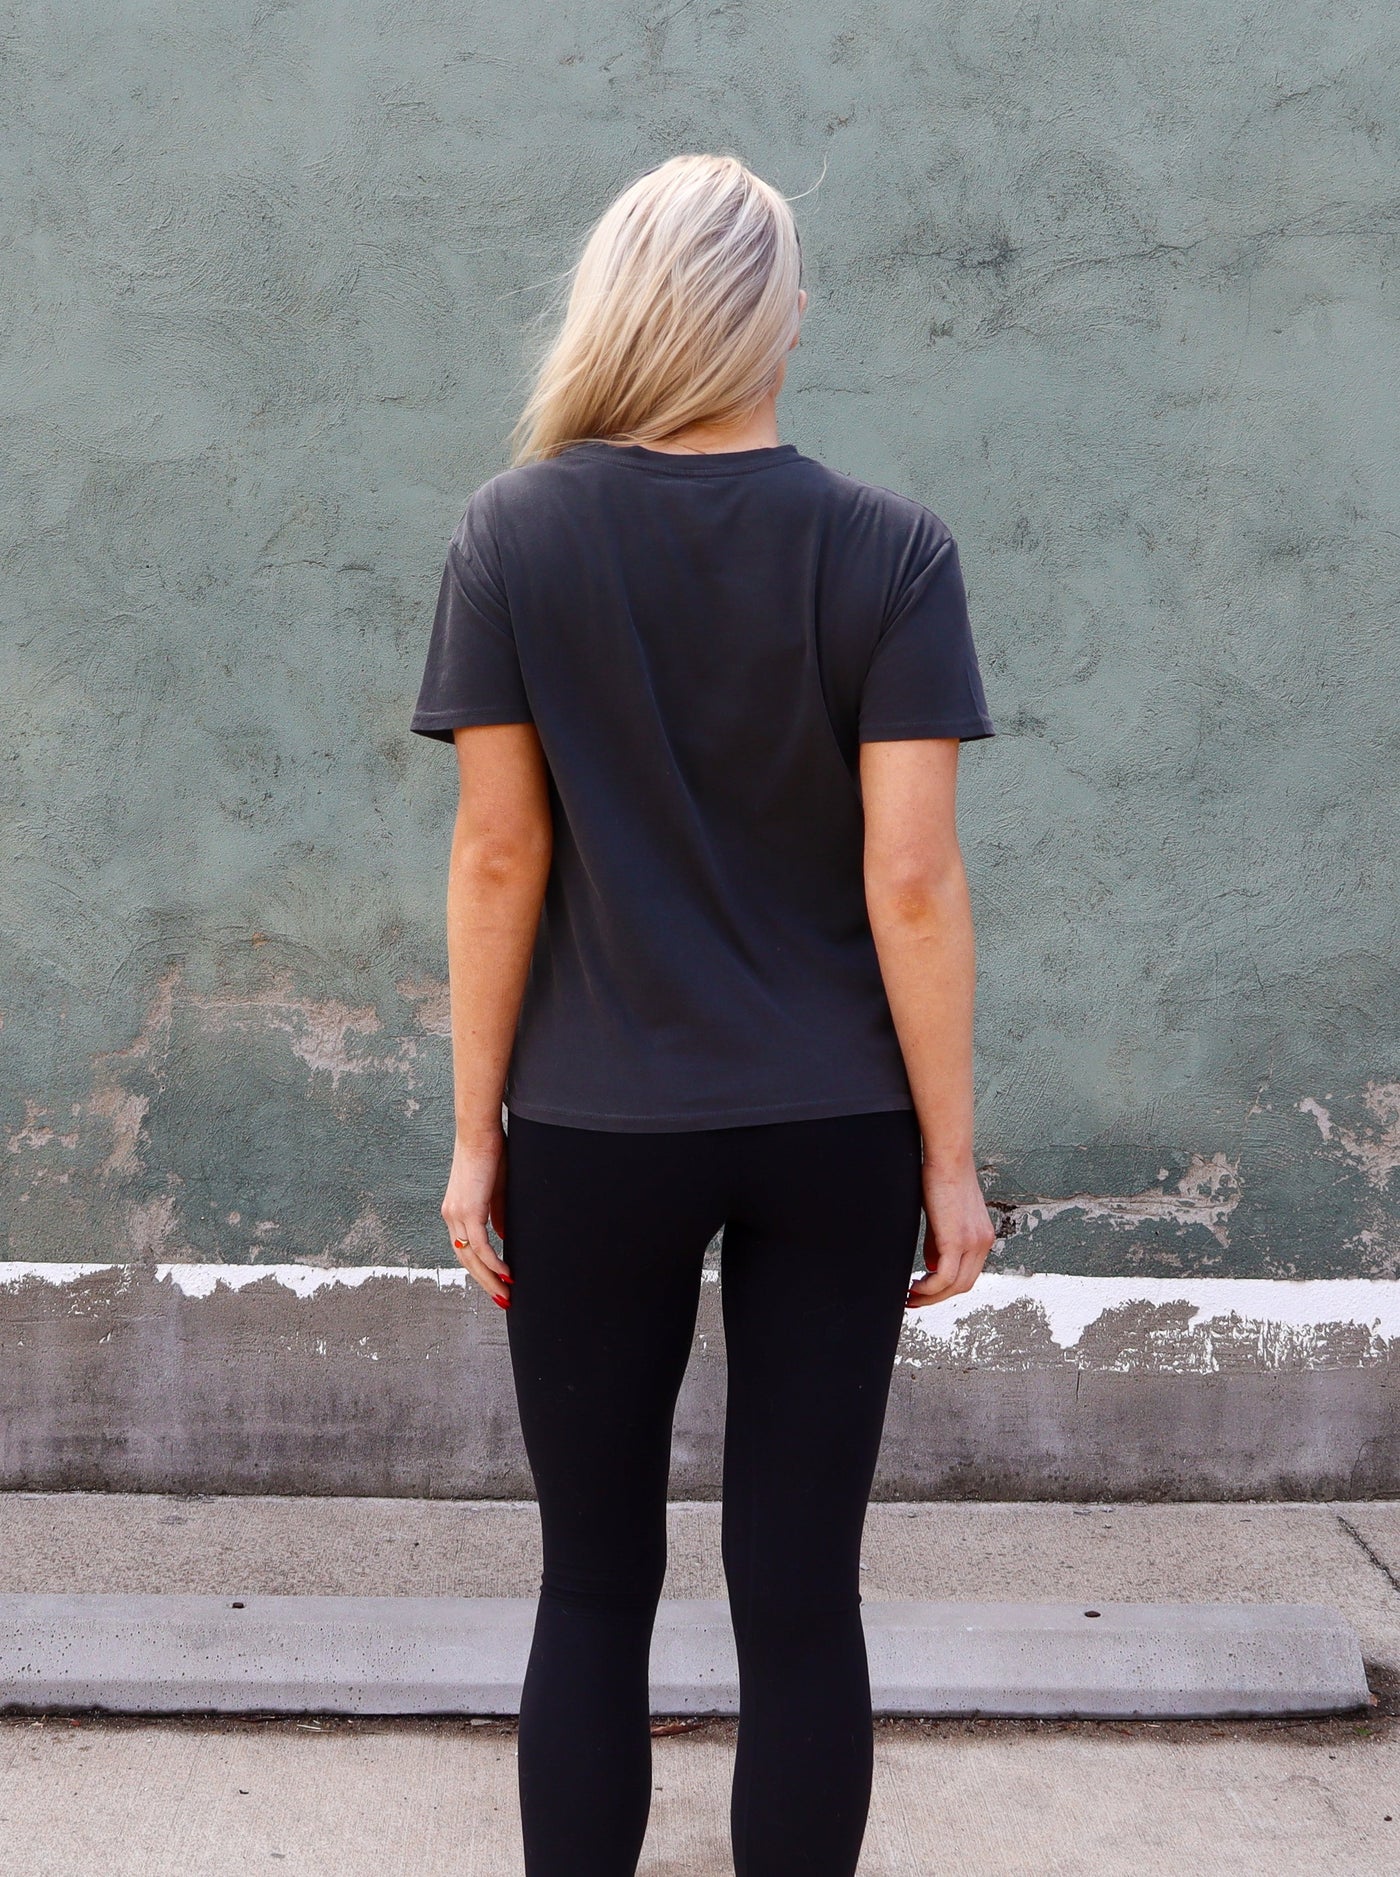 Charcoal grey graphic tee with black leggings.